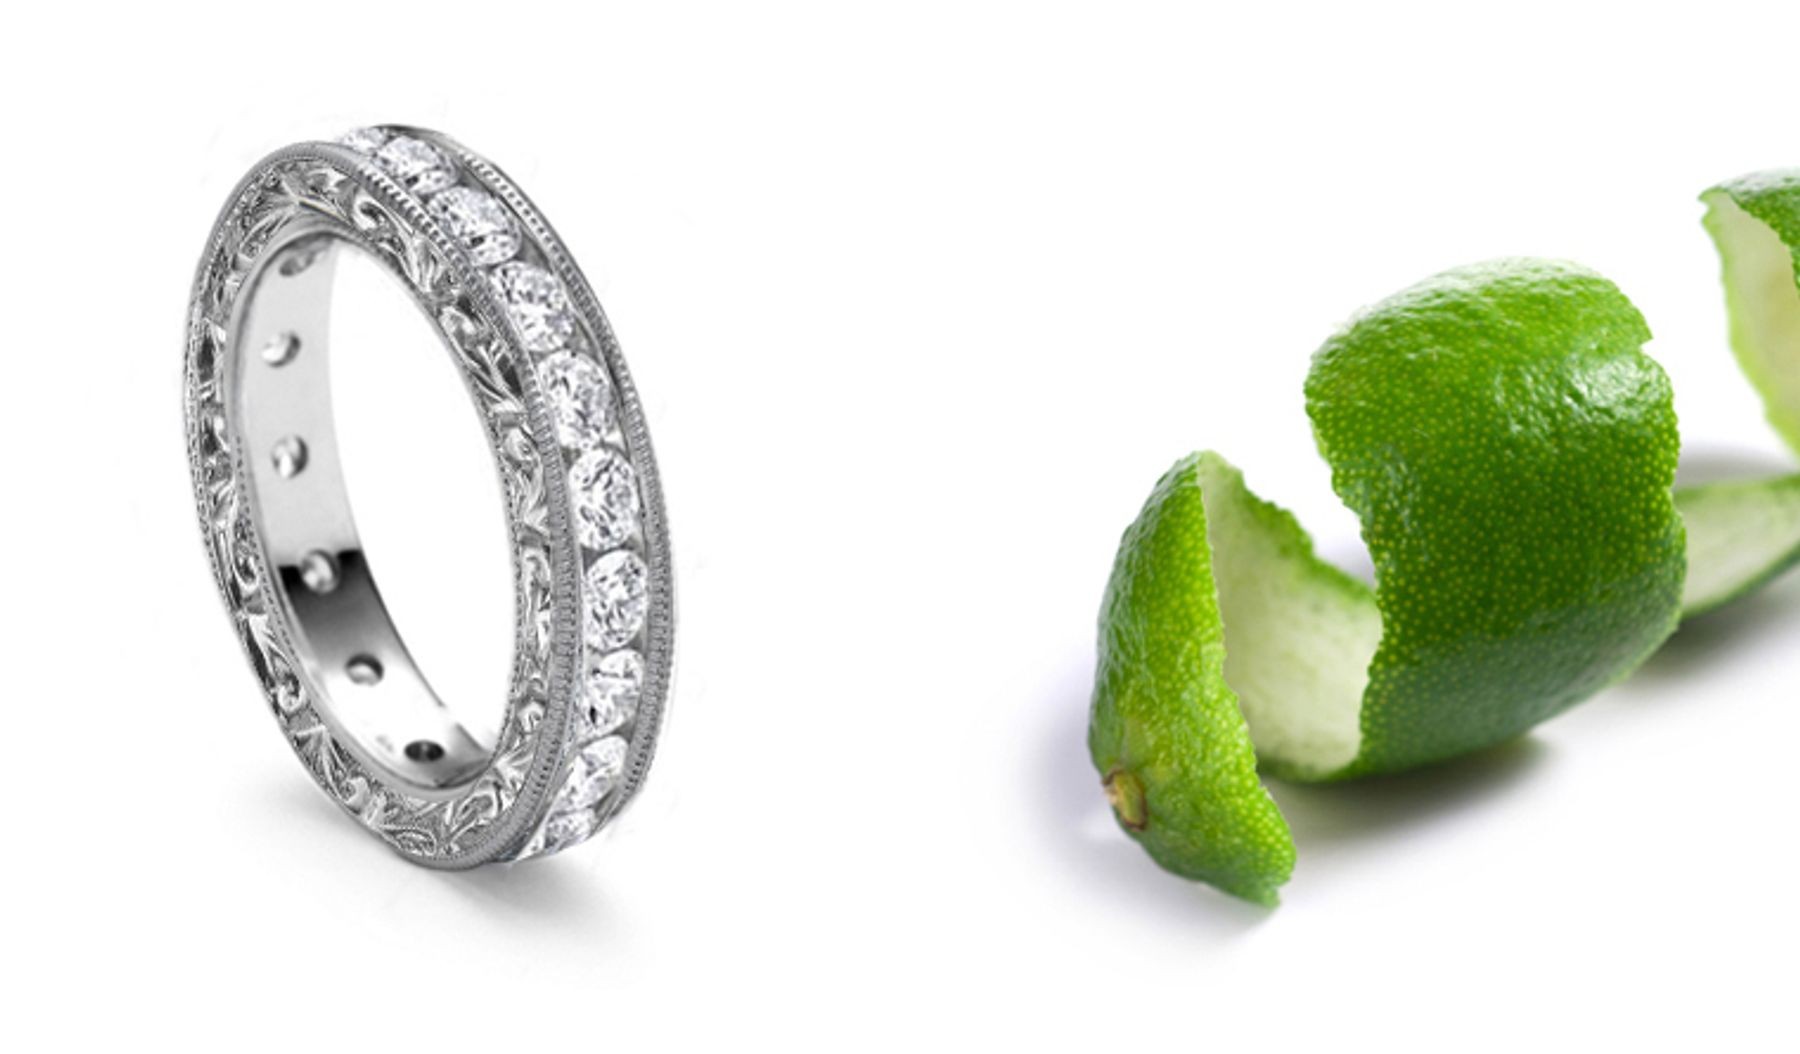 From Renaissance Court: Diamond Ring Seamlessly-Set, Perfectly-Matched, Round Cut Diamonds and Engraved Metal Sides